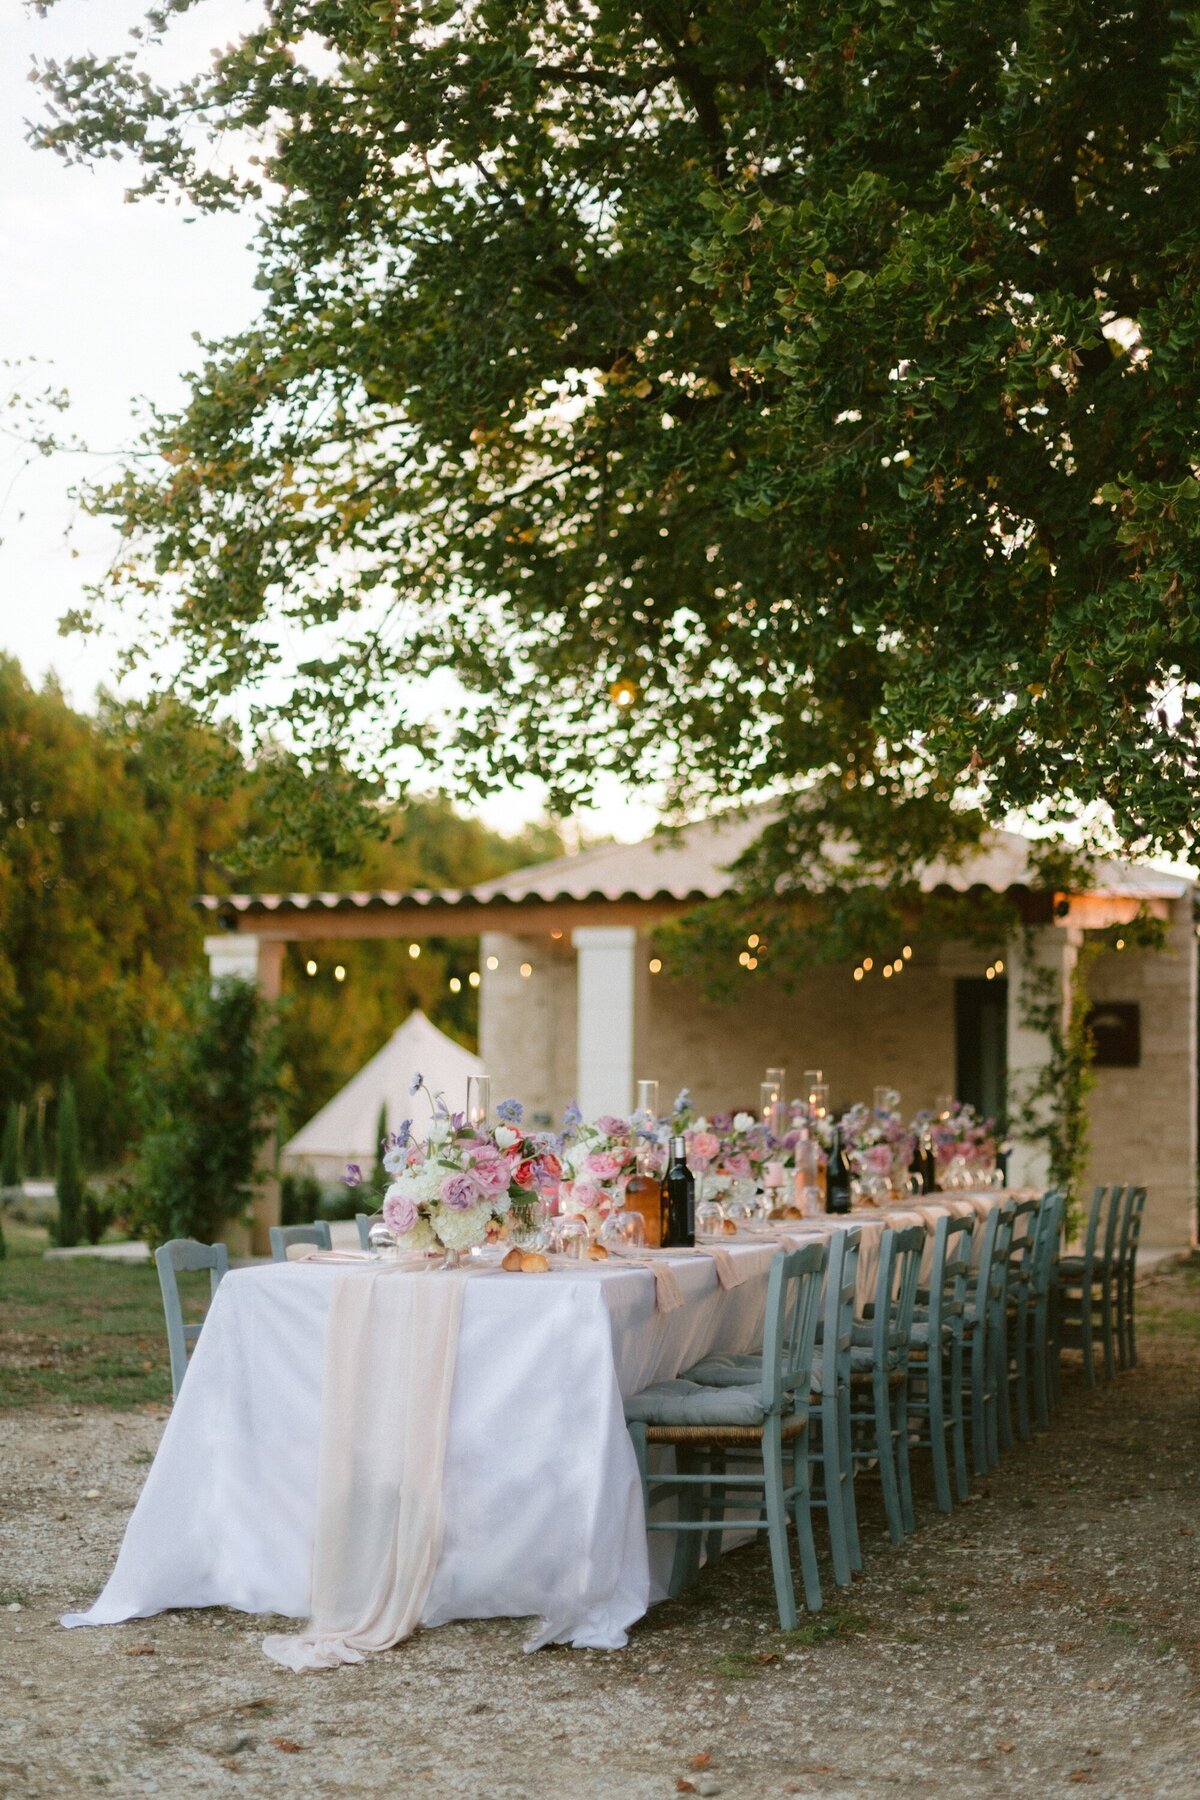 31_Ana + Matt _ Claire Macintyre-268 Kopie_Discover a refined and elegant wedding in France created by Provence Luxury Floral and Event Designer Grace and Flowers